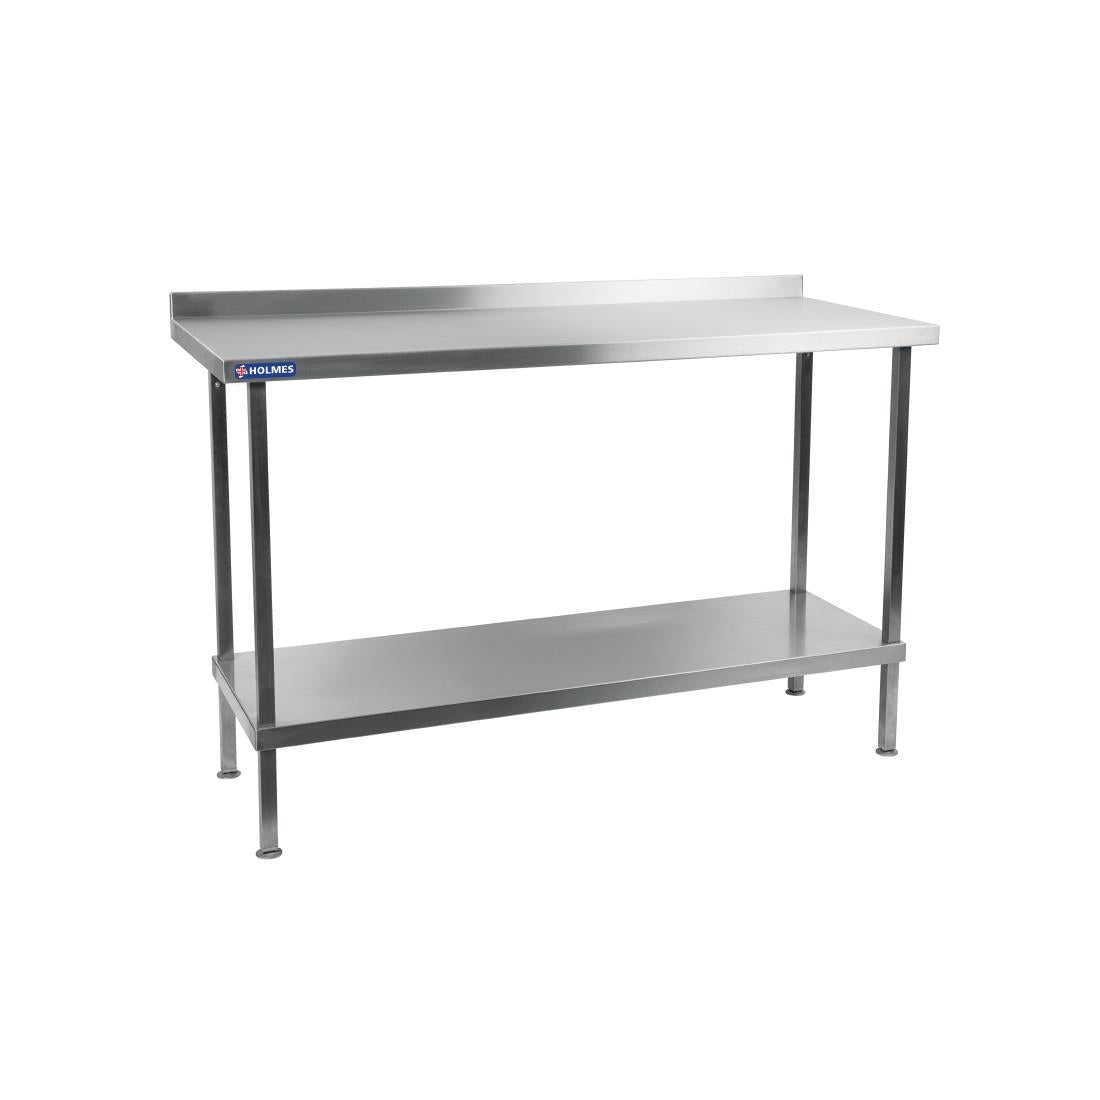 DR021 Holmes Stainless Steel Wall Table with Upstand 900mm JD Catering Equipment Solutions Ltd